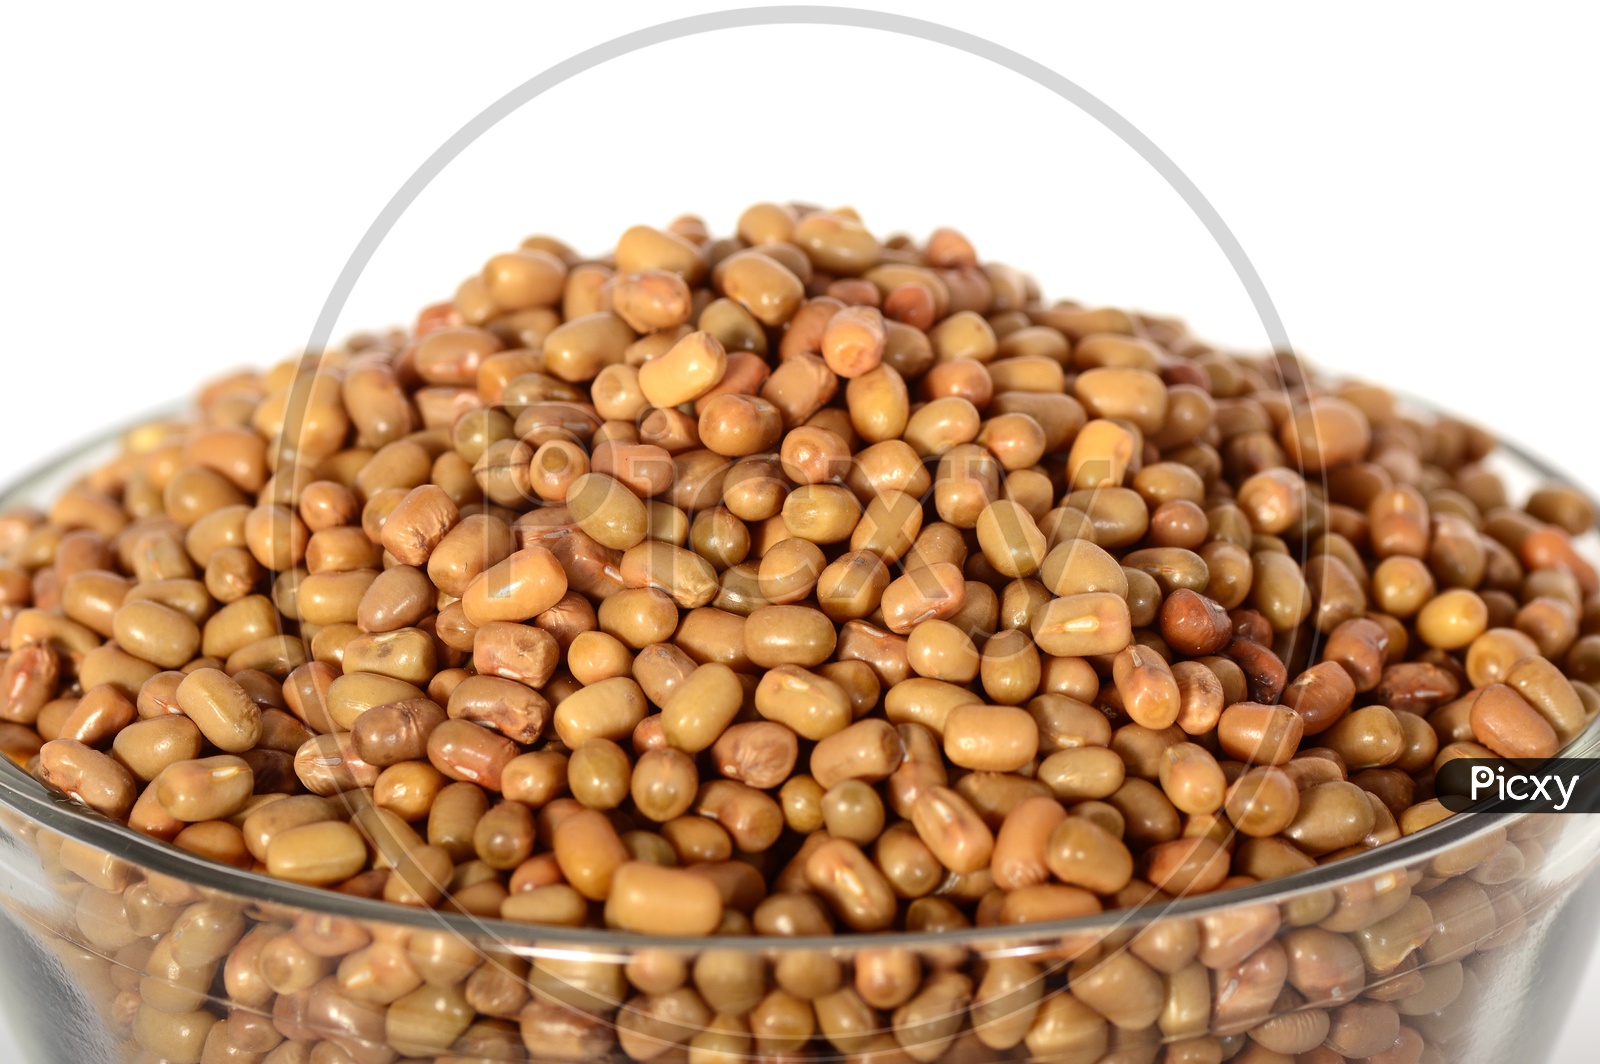 Moth Bean or Dew Bean or Legume Or Turkish Gram Or Mat Bean Or Alasandhalu  In a Bowl on an Isolated White Background